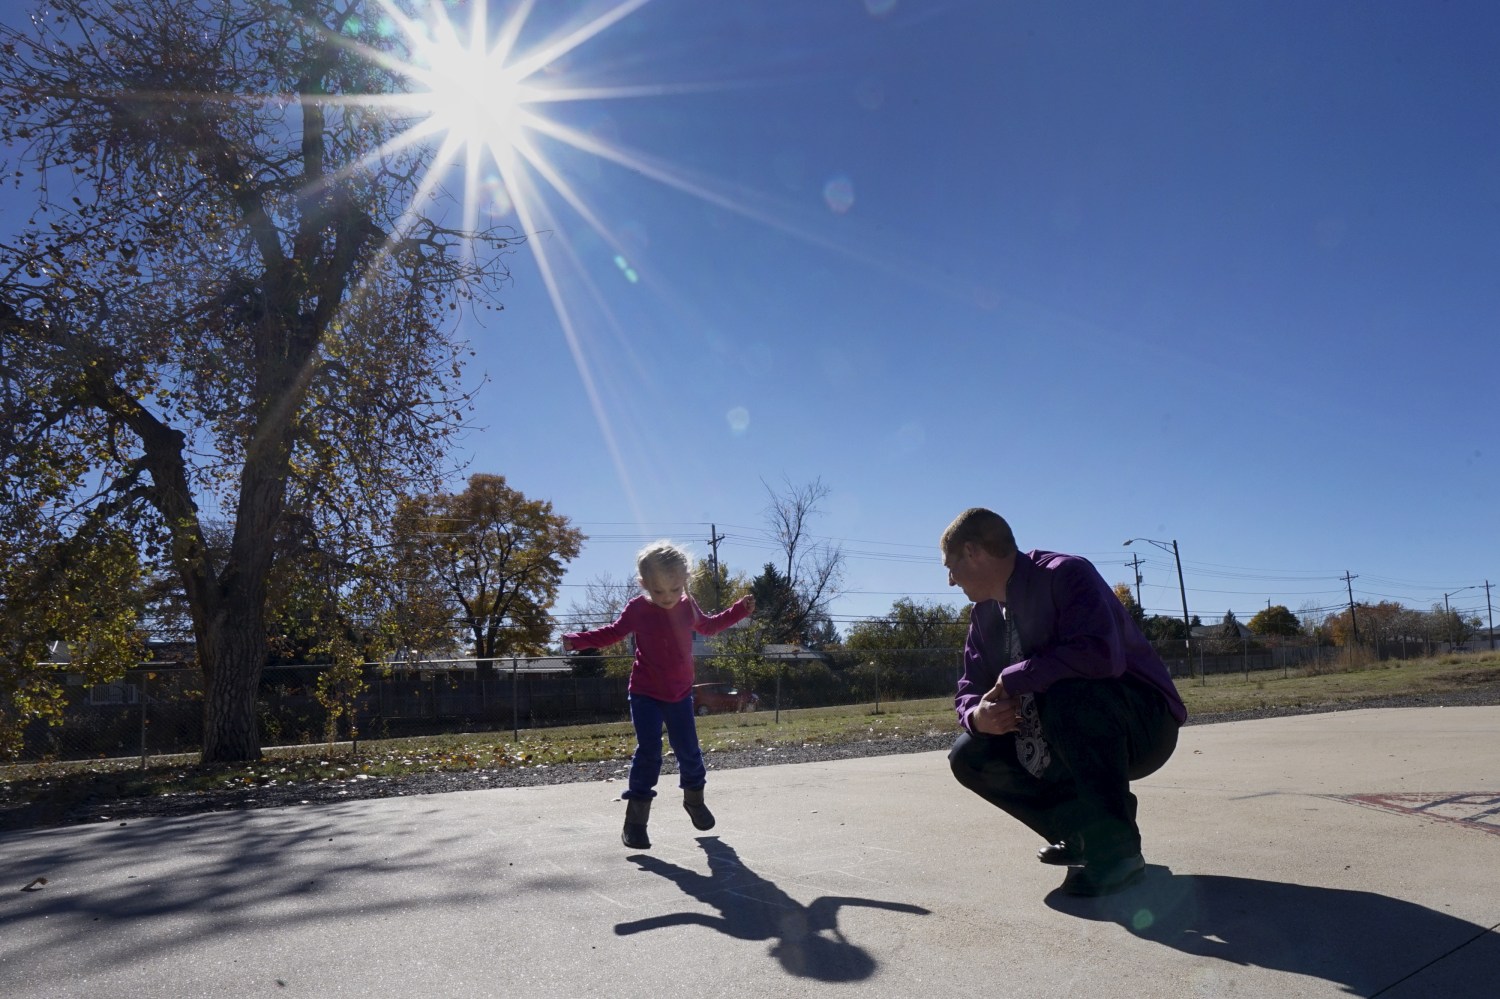 Peer 1 client Robert A. plays hopscotch with his 5-year-old daughter Isabella during Kid's Day at Peer 1 in Denver November 7, 2015. Peer 1 is a drug and alcohol rehabilitation programme for men, many having spent years in and out of prison, in Denver, Colorado. The men have often tried and failed over and over to turn their life around. With histories of abuse as children and living on the streets, they come to Peer 1 hoping to turn away from addiction and crime, to rebuild their lives and learn how to integrate into society. Treatment includes family group therapy, meditation and trust-building exercises.  REUTERS/Rick WilkingPICTURE 25 OF 26 FOR WIDER IMAGE STORY "PEER 1: PRISON, DEATH OR RECOVERY". SEARCH "PEER WILKING" FOR ALL IMAGES - GF20000082782